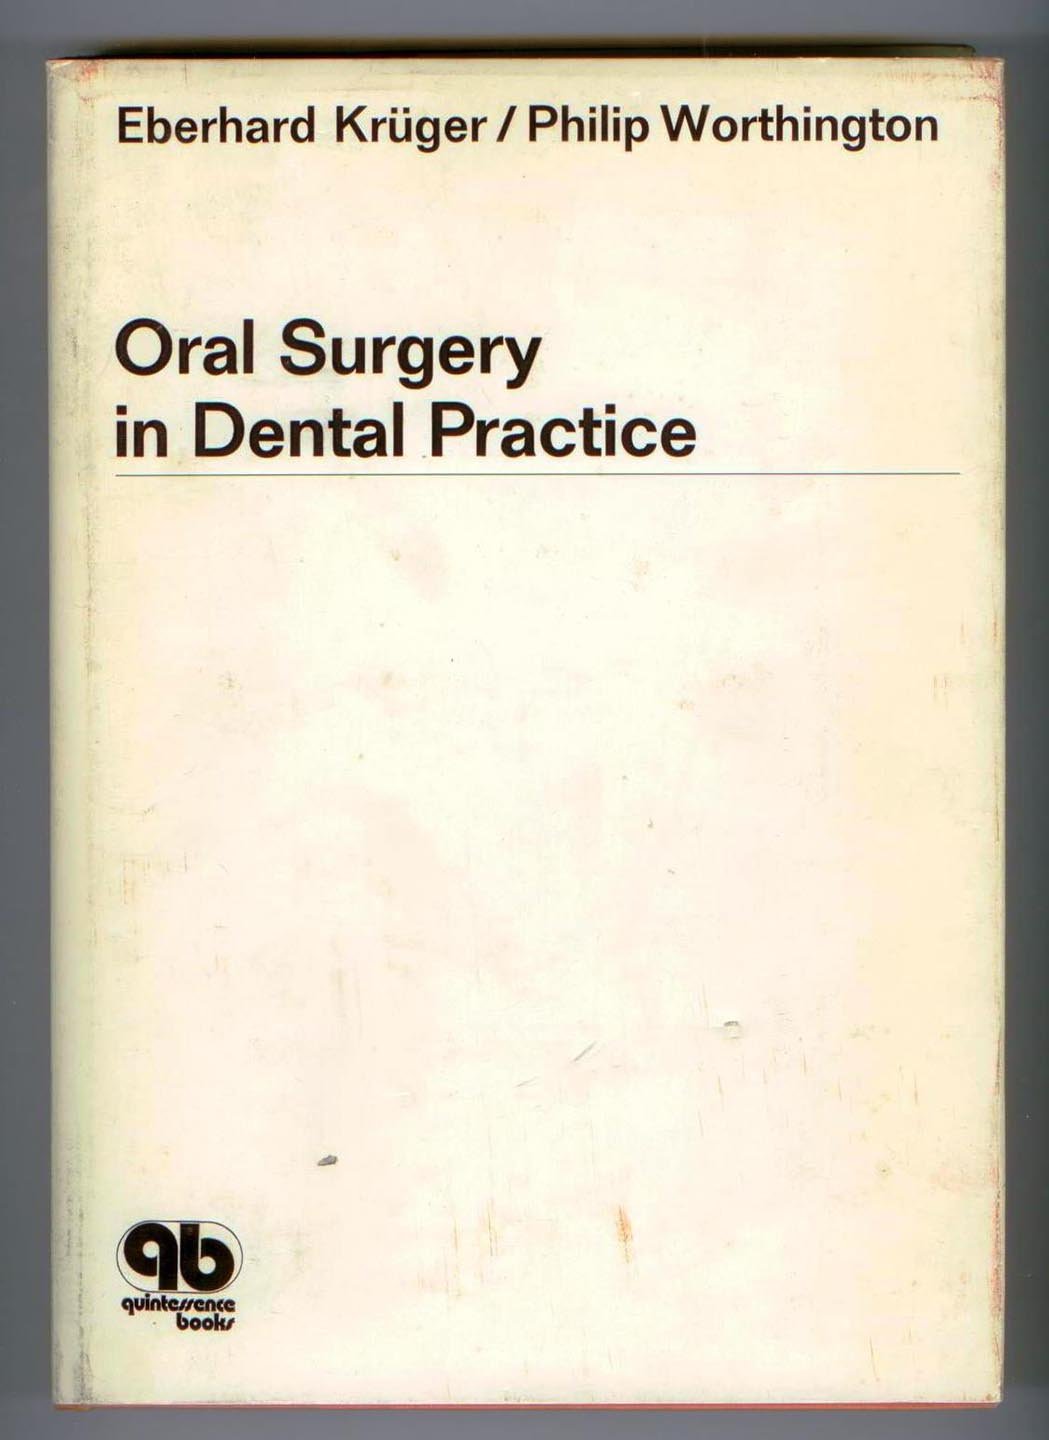 Oral Surgery in Dental Practice